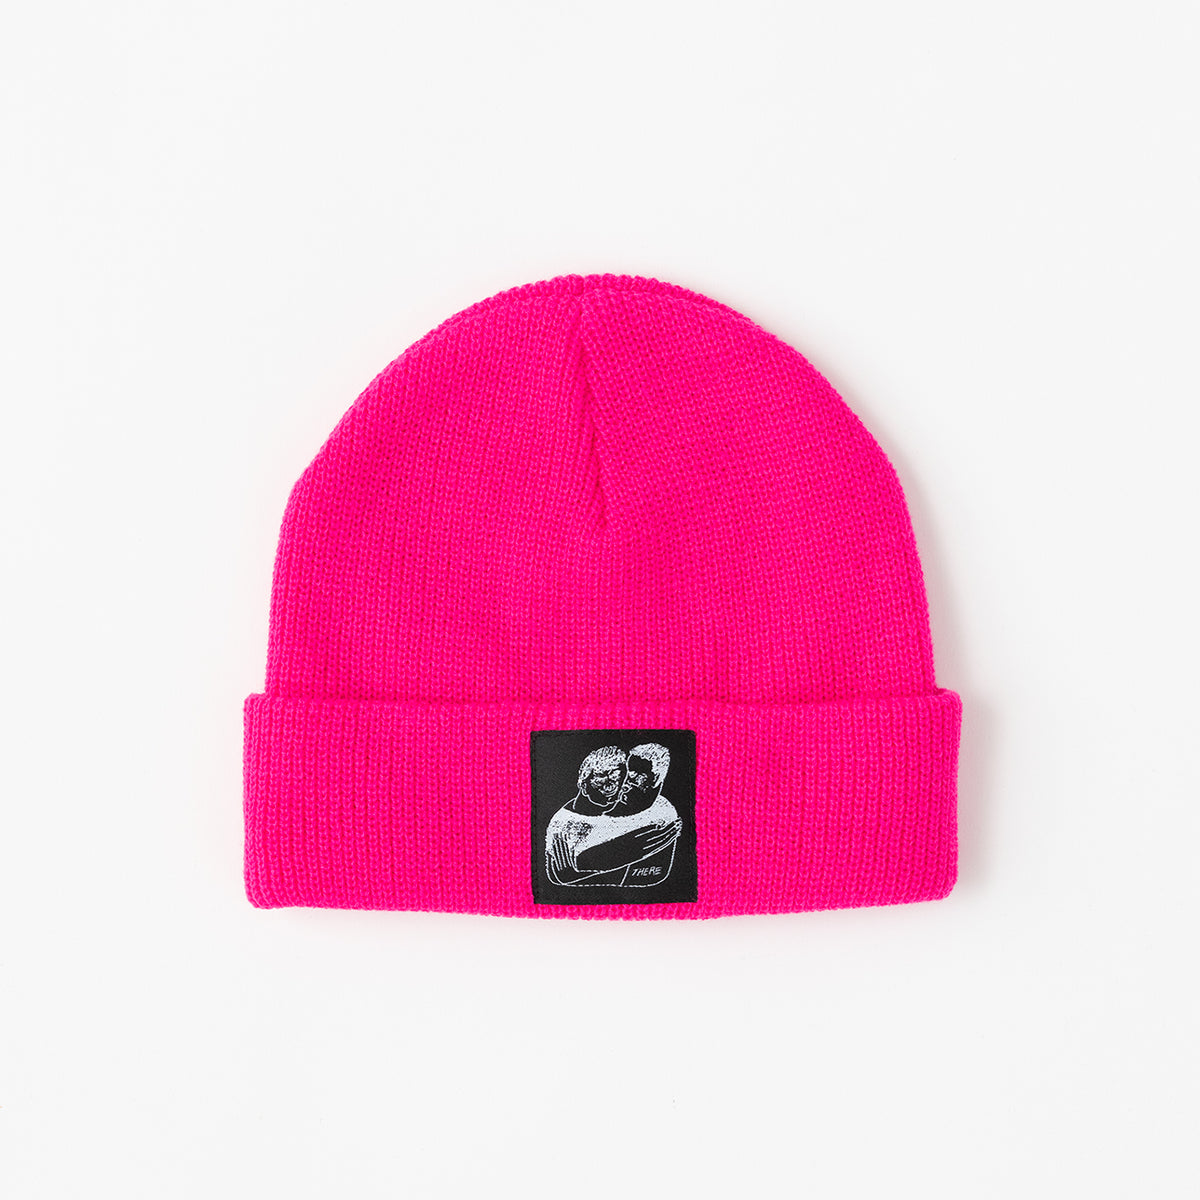 Stuck With You Beanie (Pink)